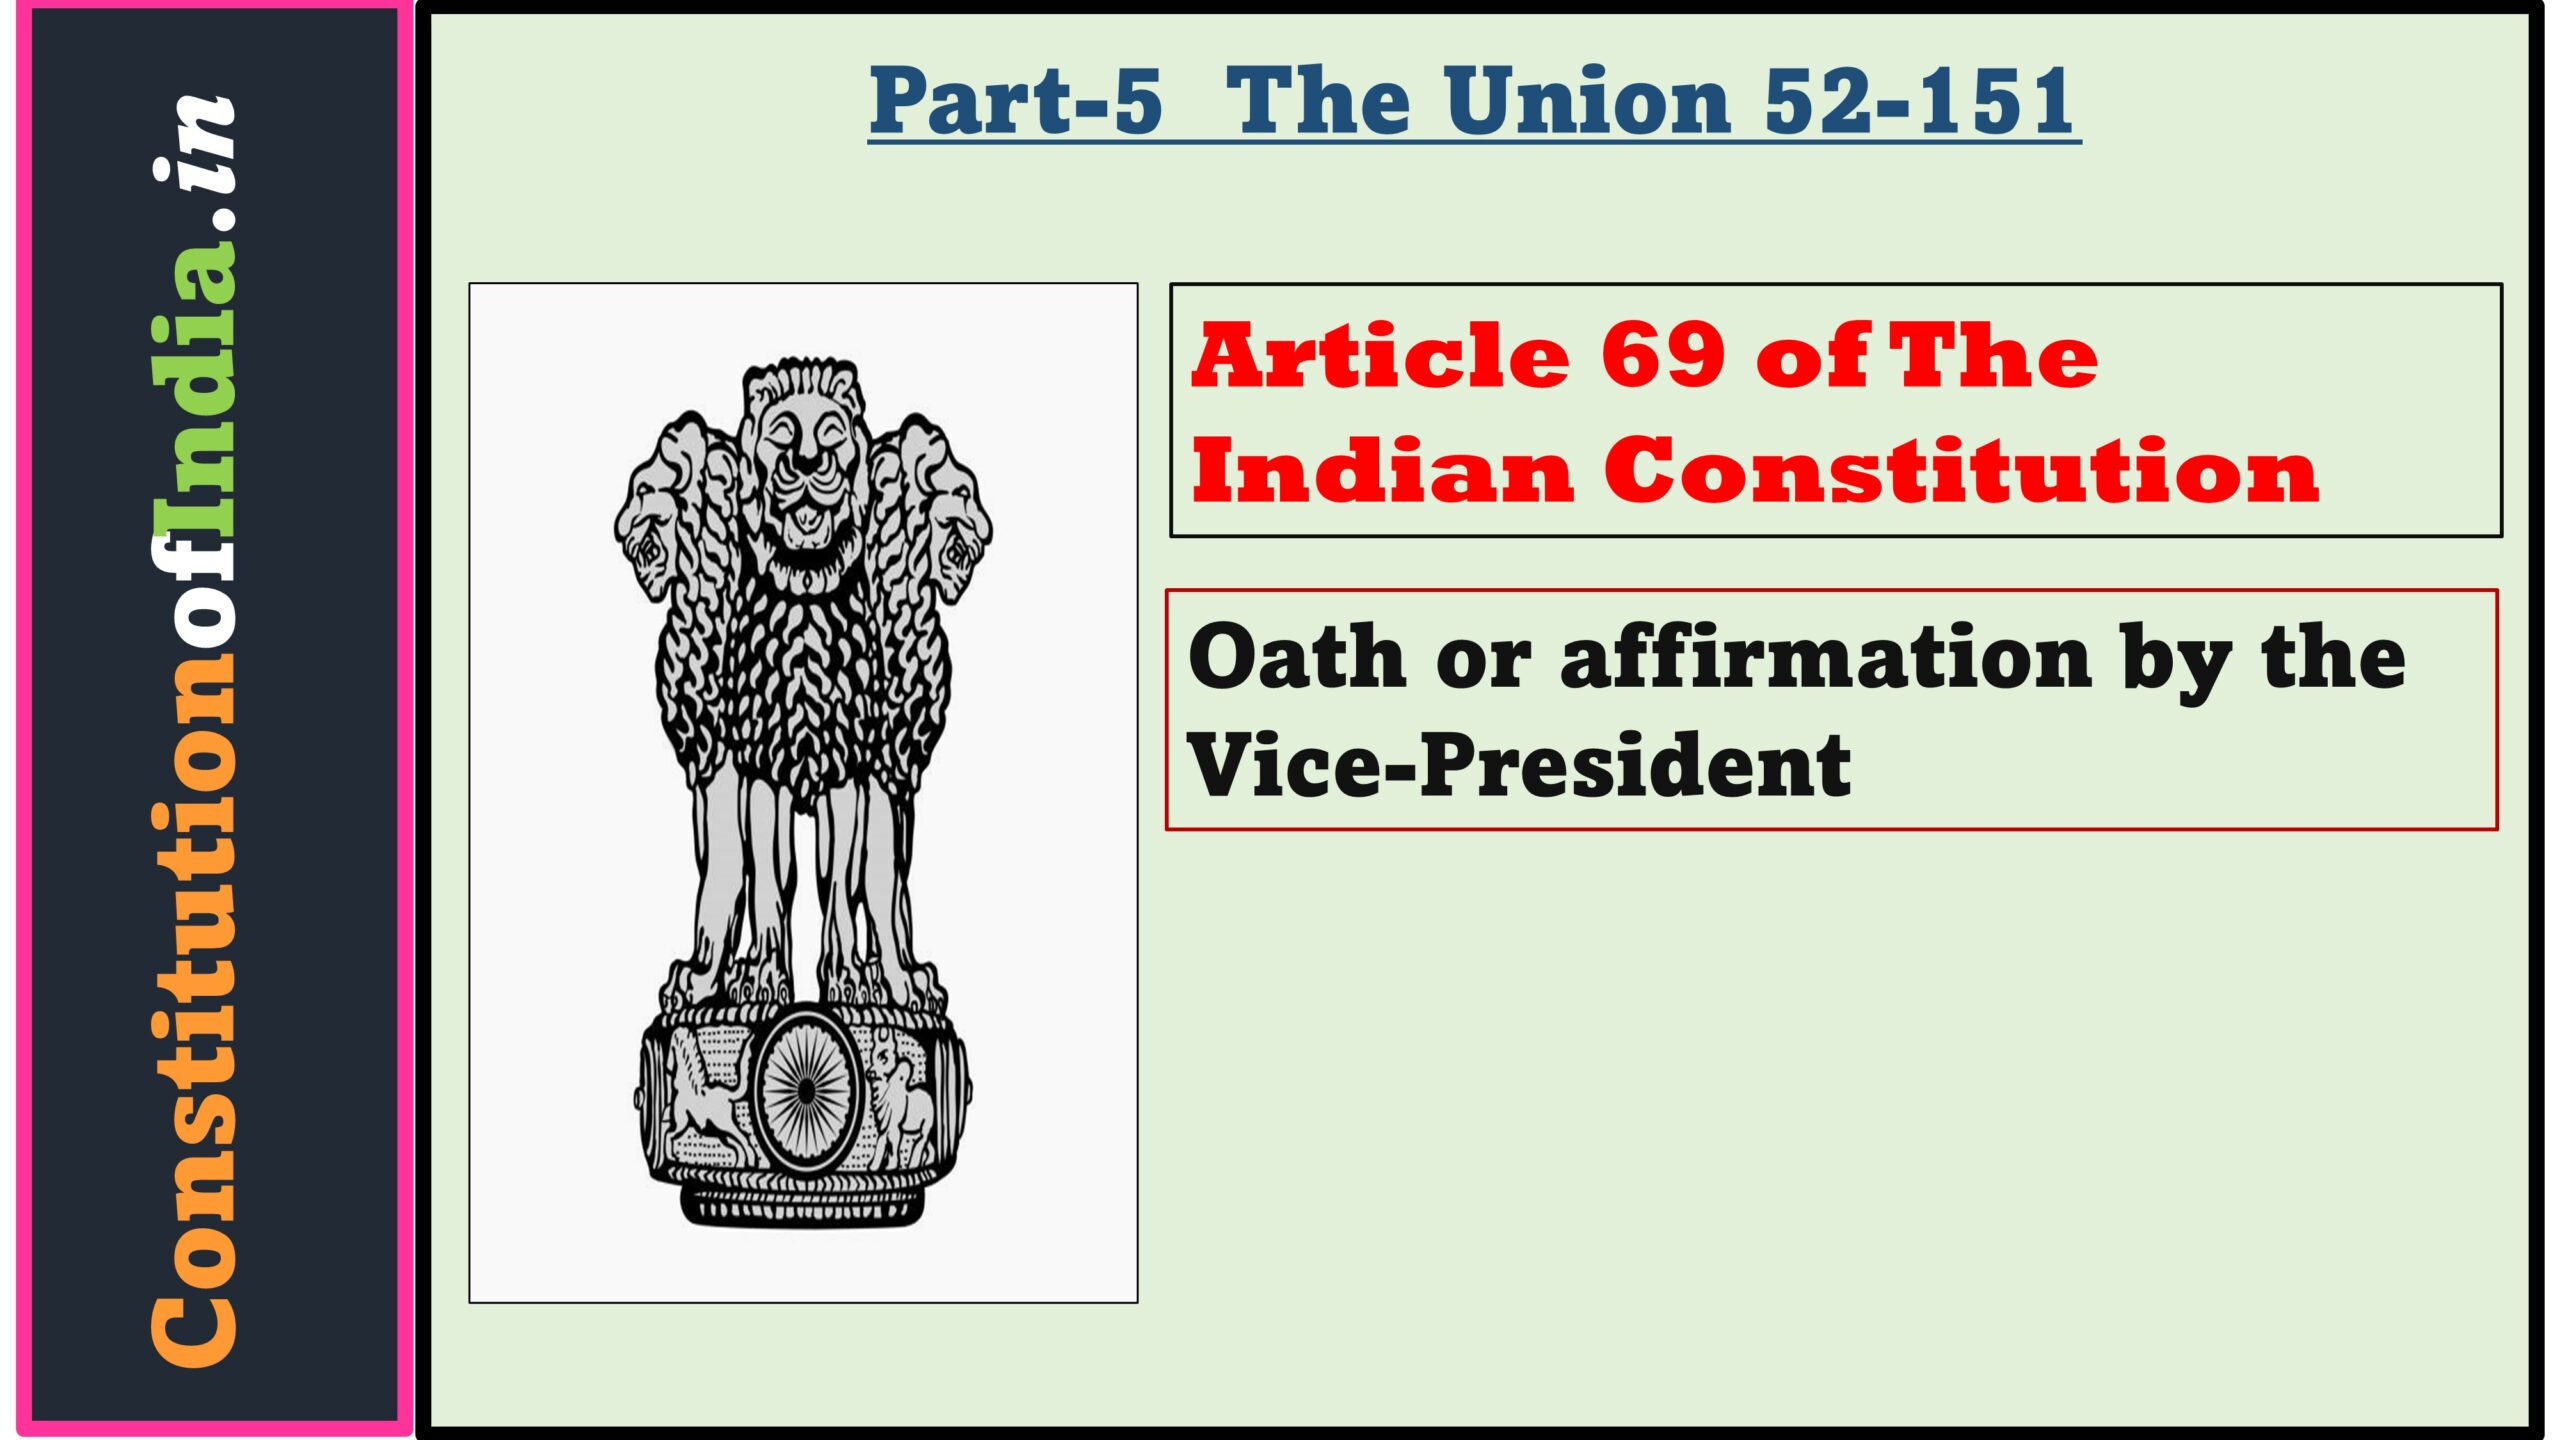 Article 69 of Indian Constitution